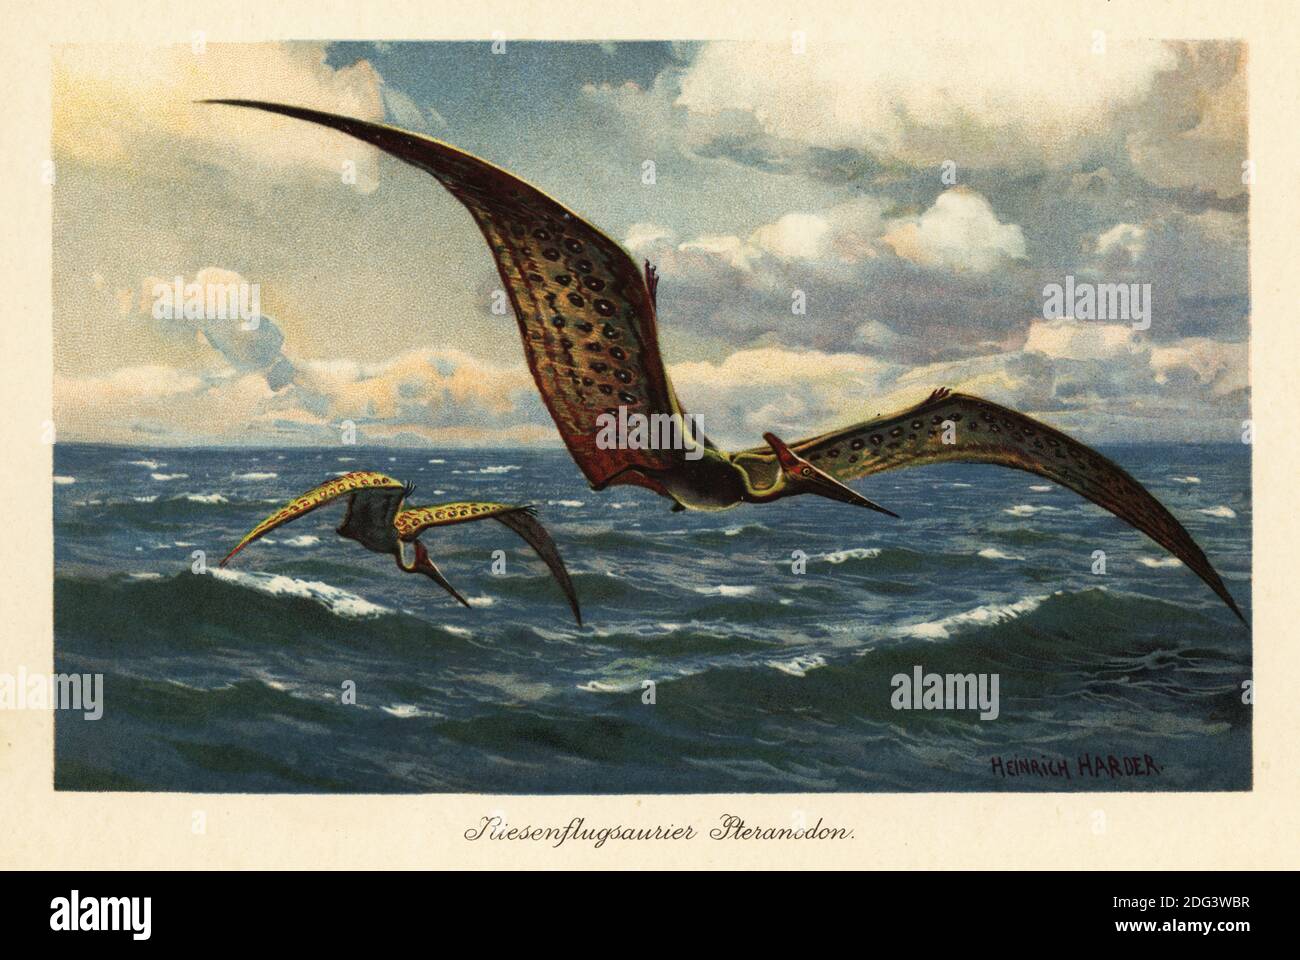 Pteranodon longiceps flying over the sea. Pteranodon (from the Greek for wing and toothless. Large flying pterosaurs from the Late Cretaceous with a wingspan of seven meters. Riesenflugsaurier Pteranodon. Colour printed illustration by Heinrich Harder from Wilhelm Bolsche’s Tiere der Urwelt (Animals of the Prehistoric World), Reichardt Cocoa company, Hamburg, 1908. Heinrich Harder (1858-1935) was a German landscape artist and book illustrator. Stock Photo